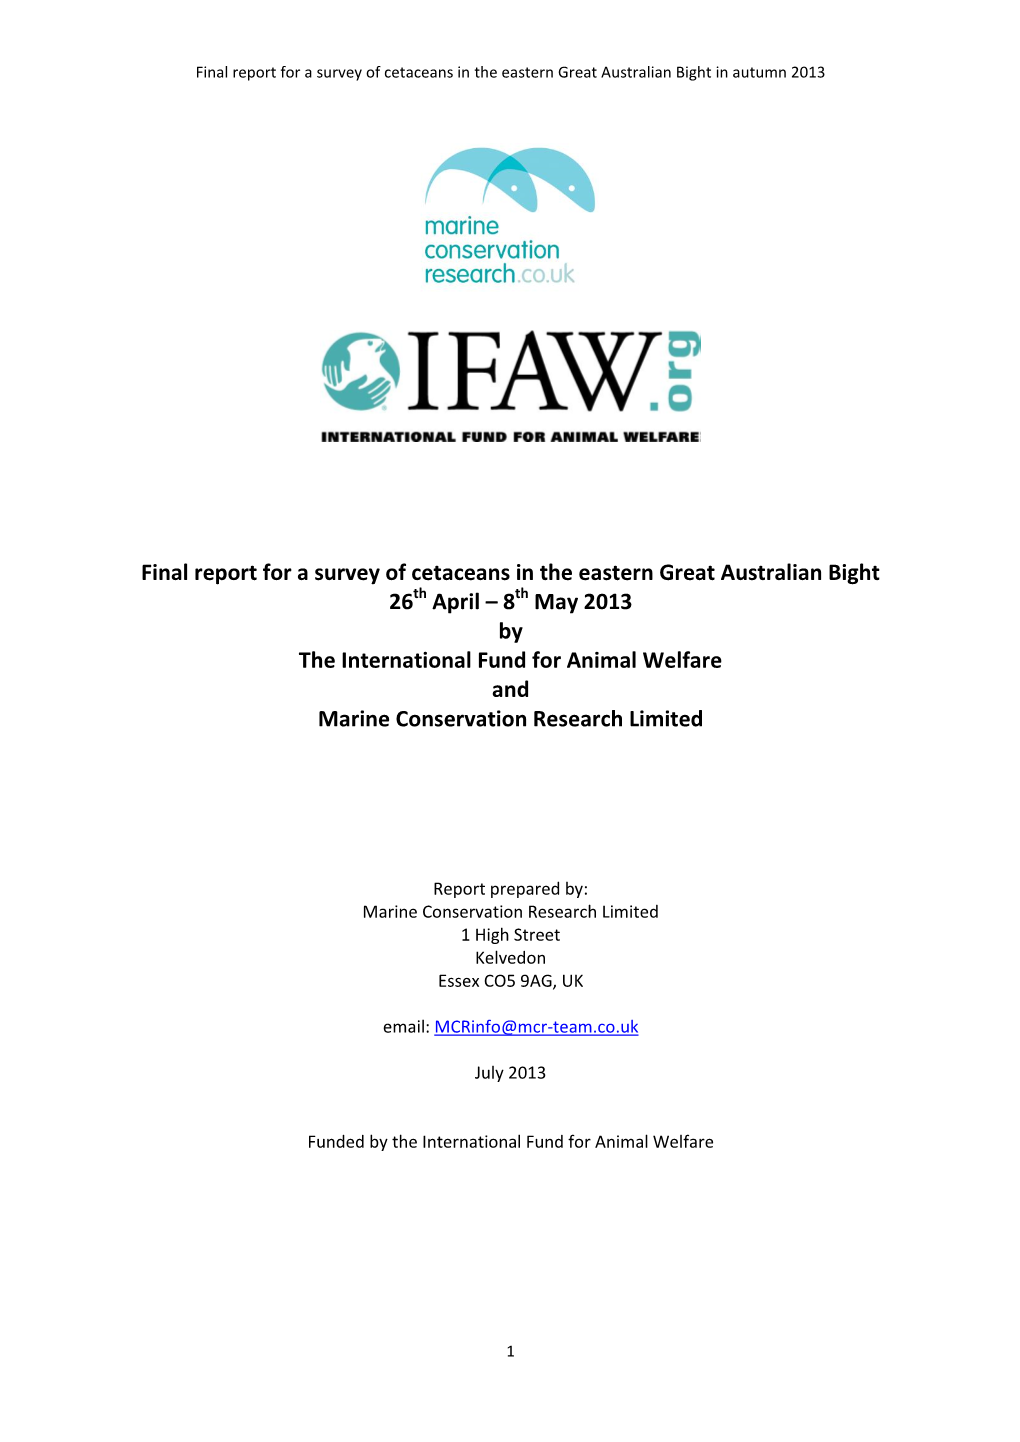 Final Report for a Survey of Cetaceans in the Eastern Great Australian Bight in Autumn 2013